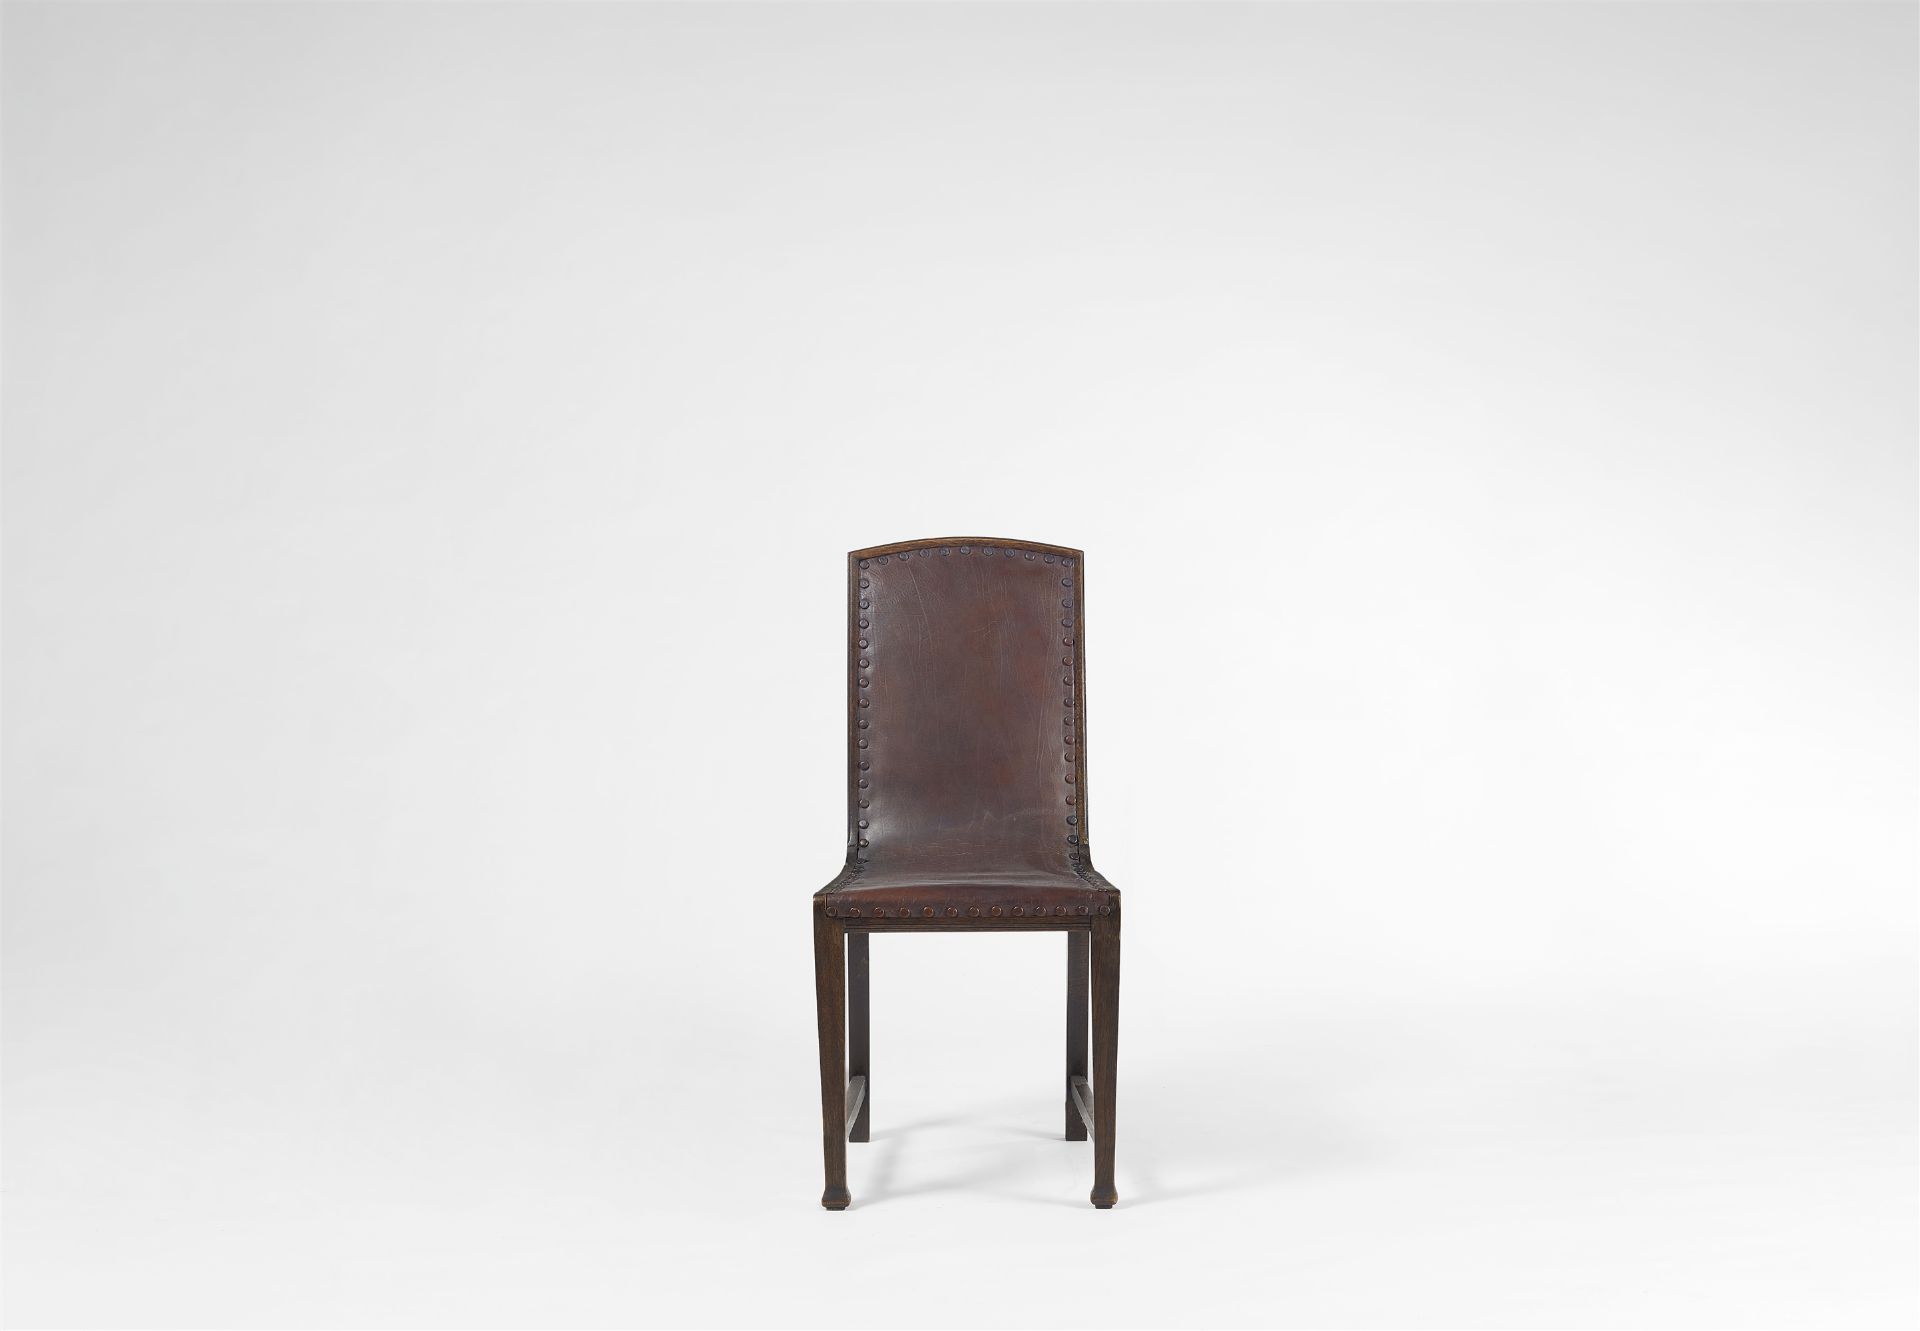 Chair by Lawrenz & Co. Berlin - Image 4 of 4